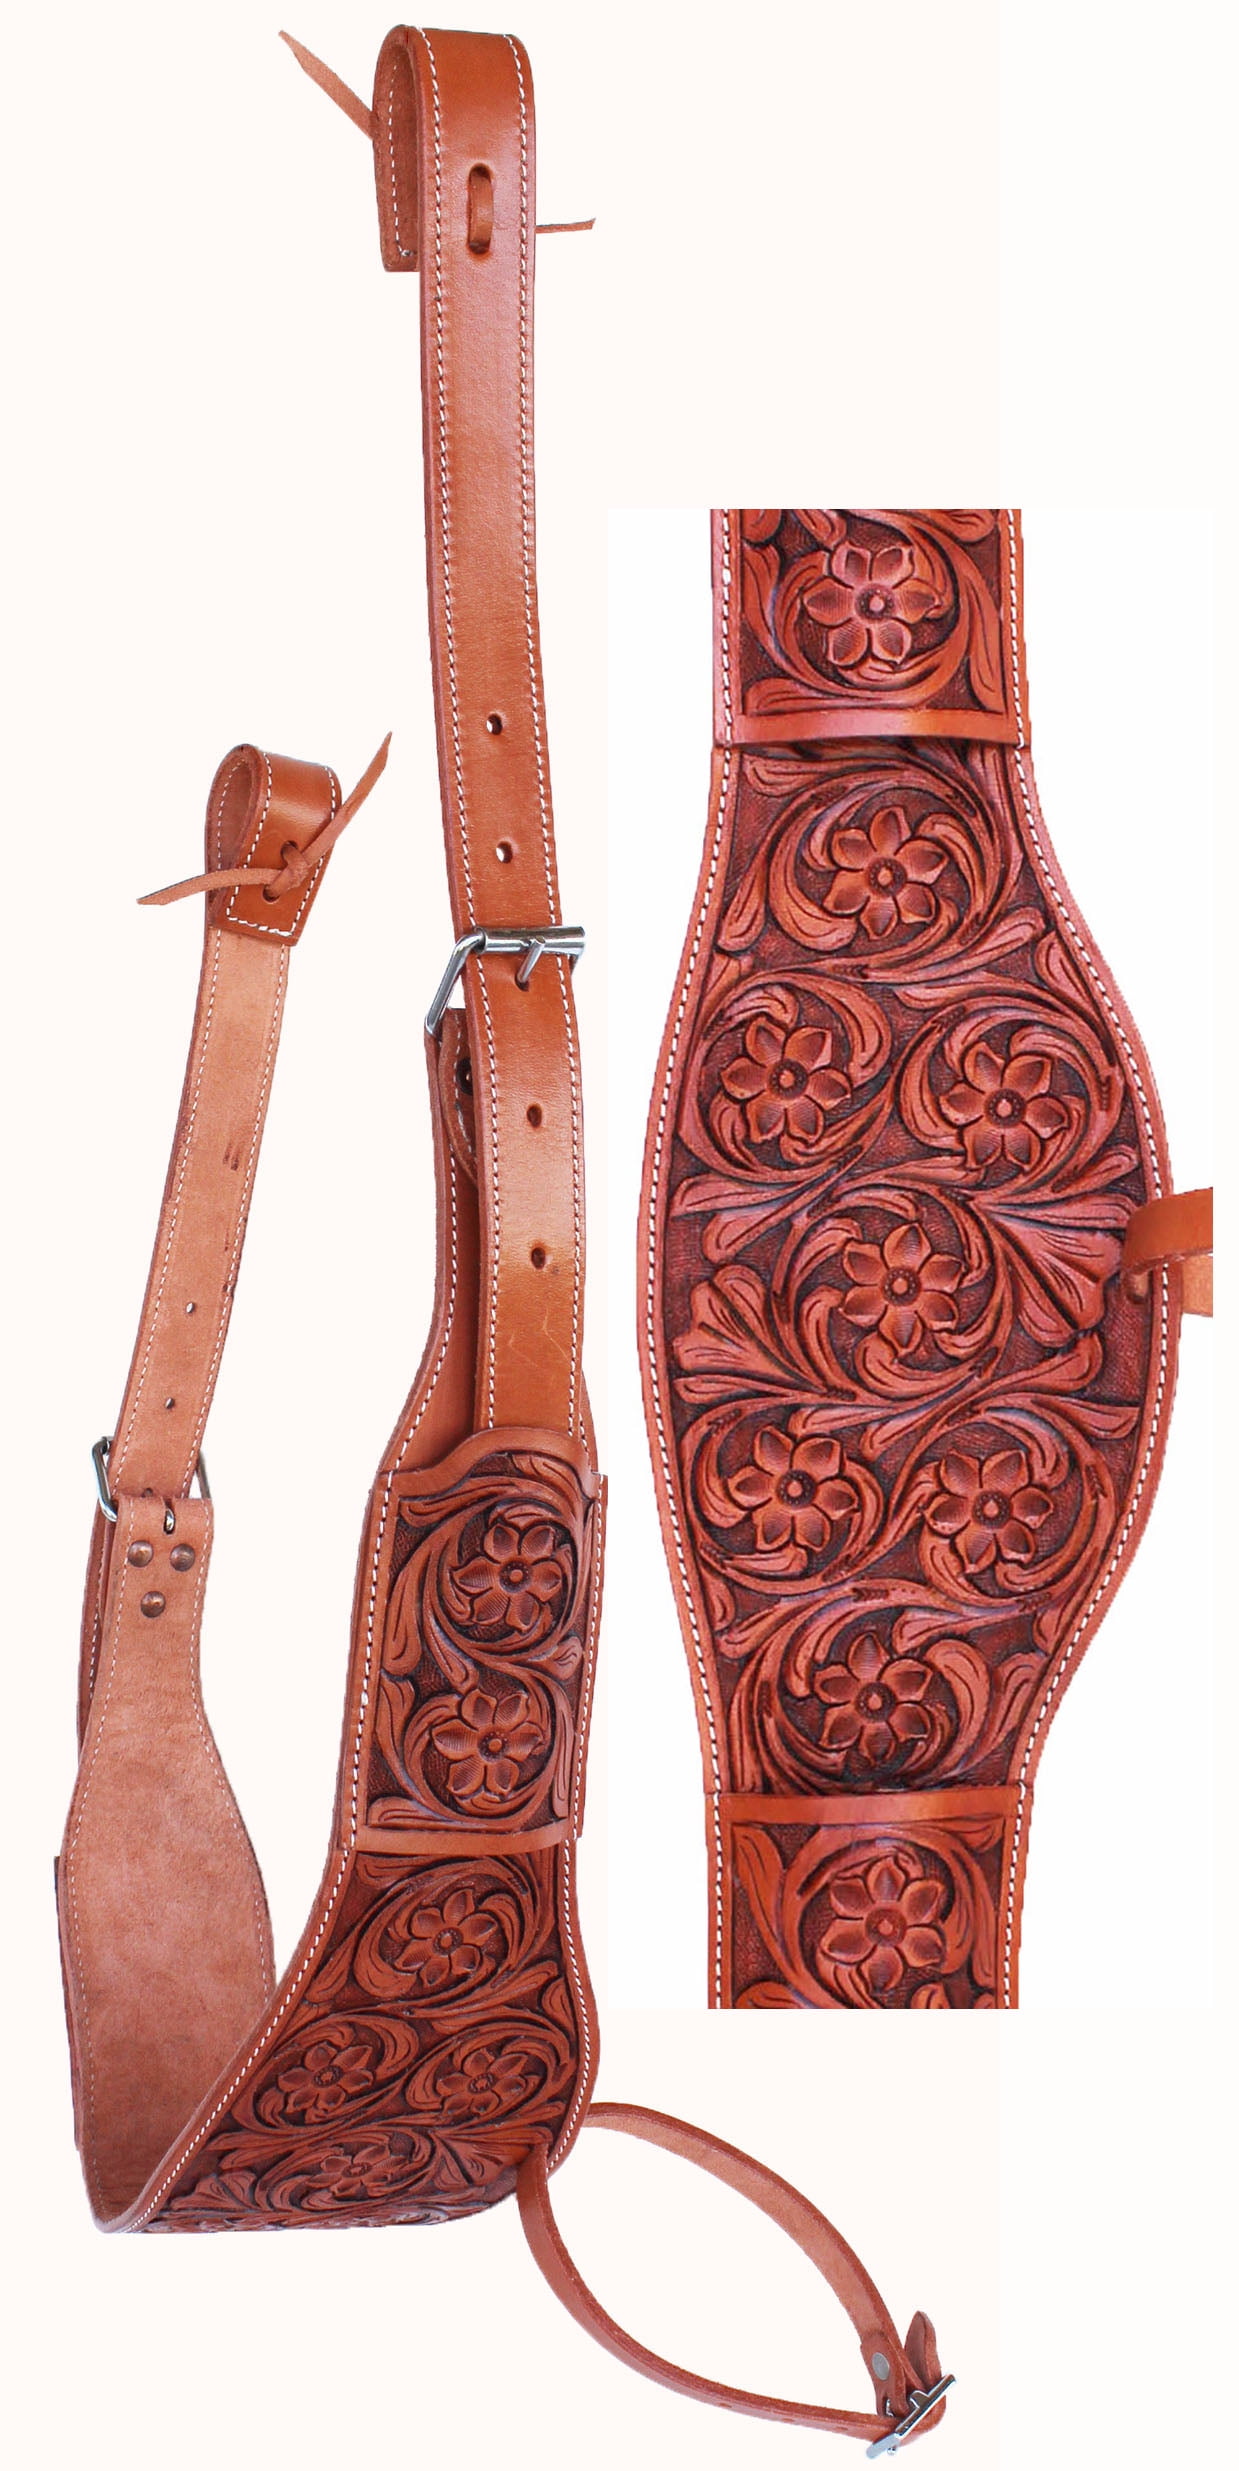 WESTERN RODEO BACK CINCH TOOLED LEATHER HORSE SADDLE REAR GIRTH BARREL TRAIL 